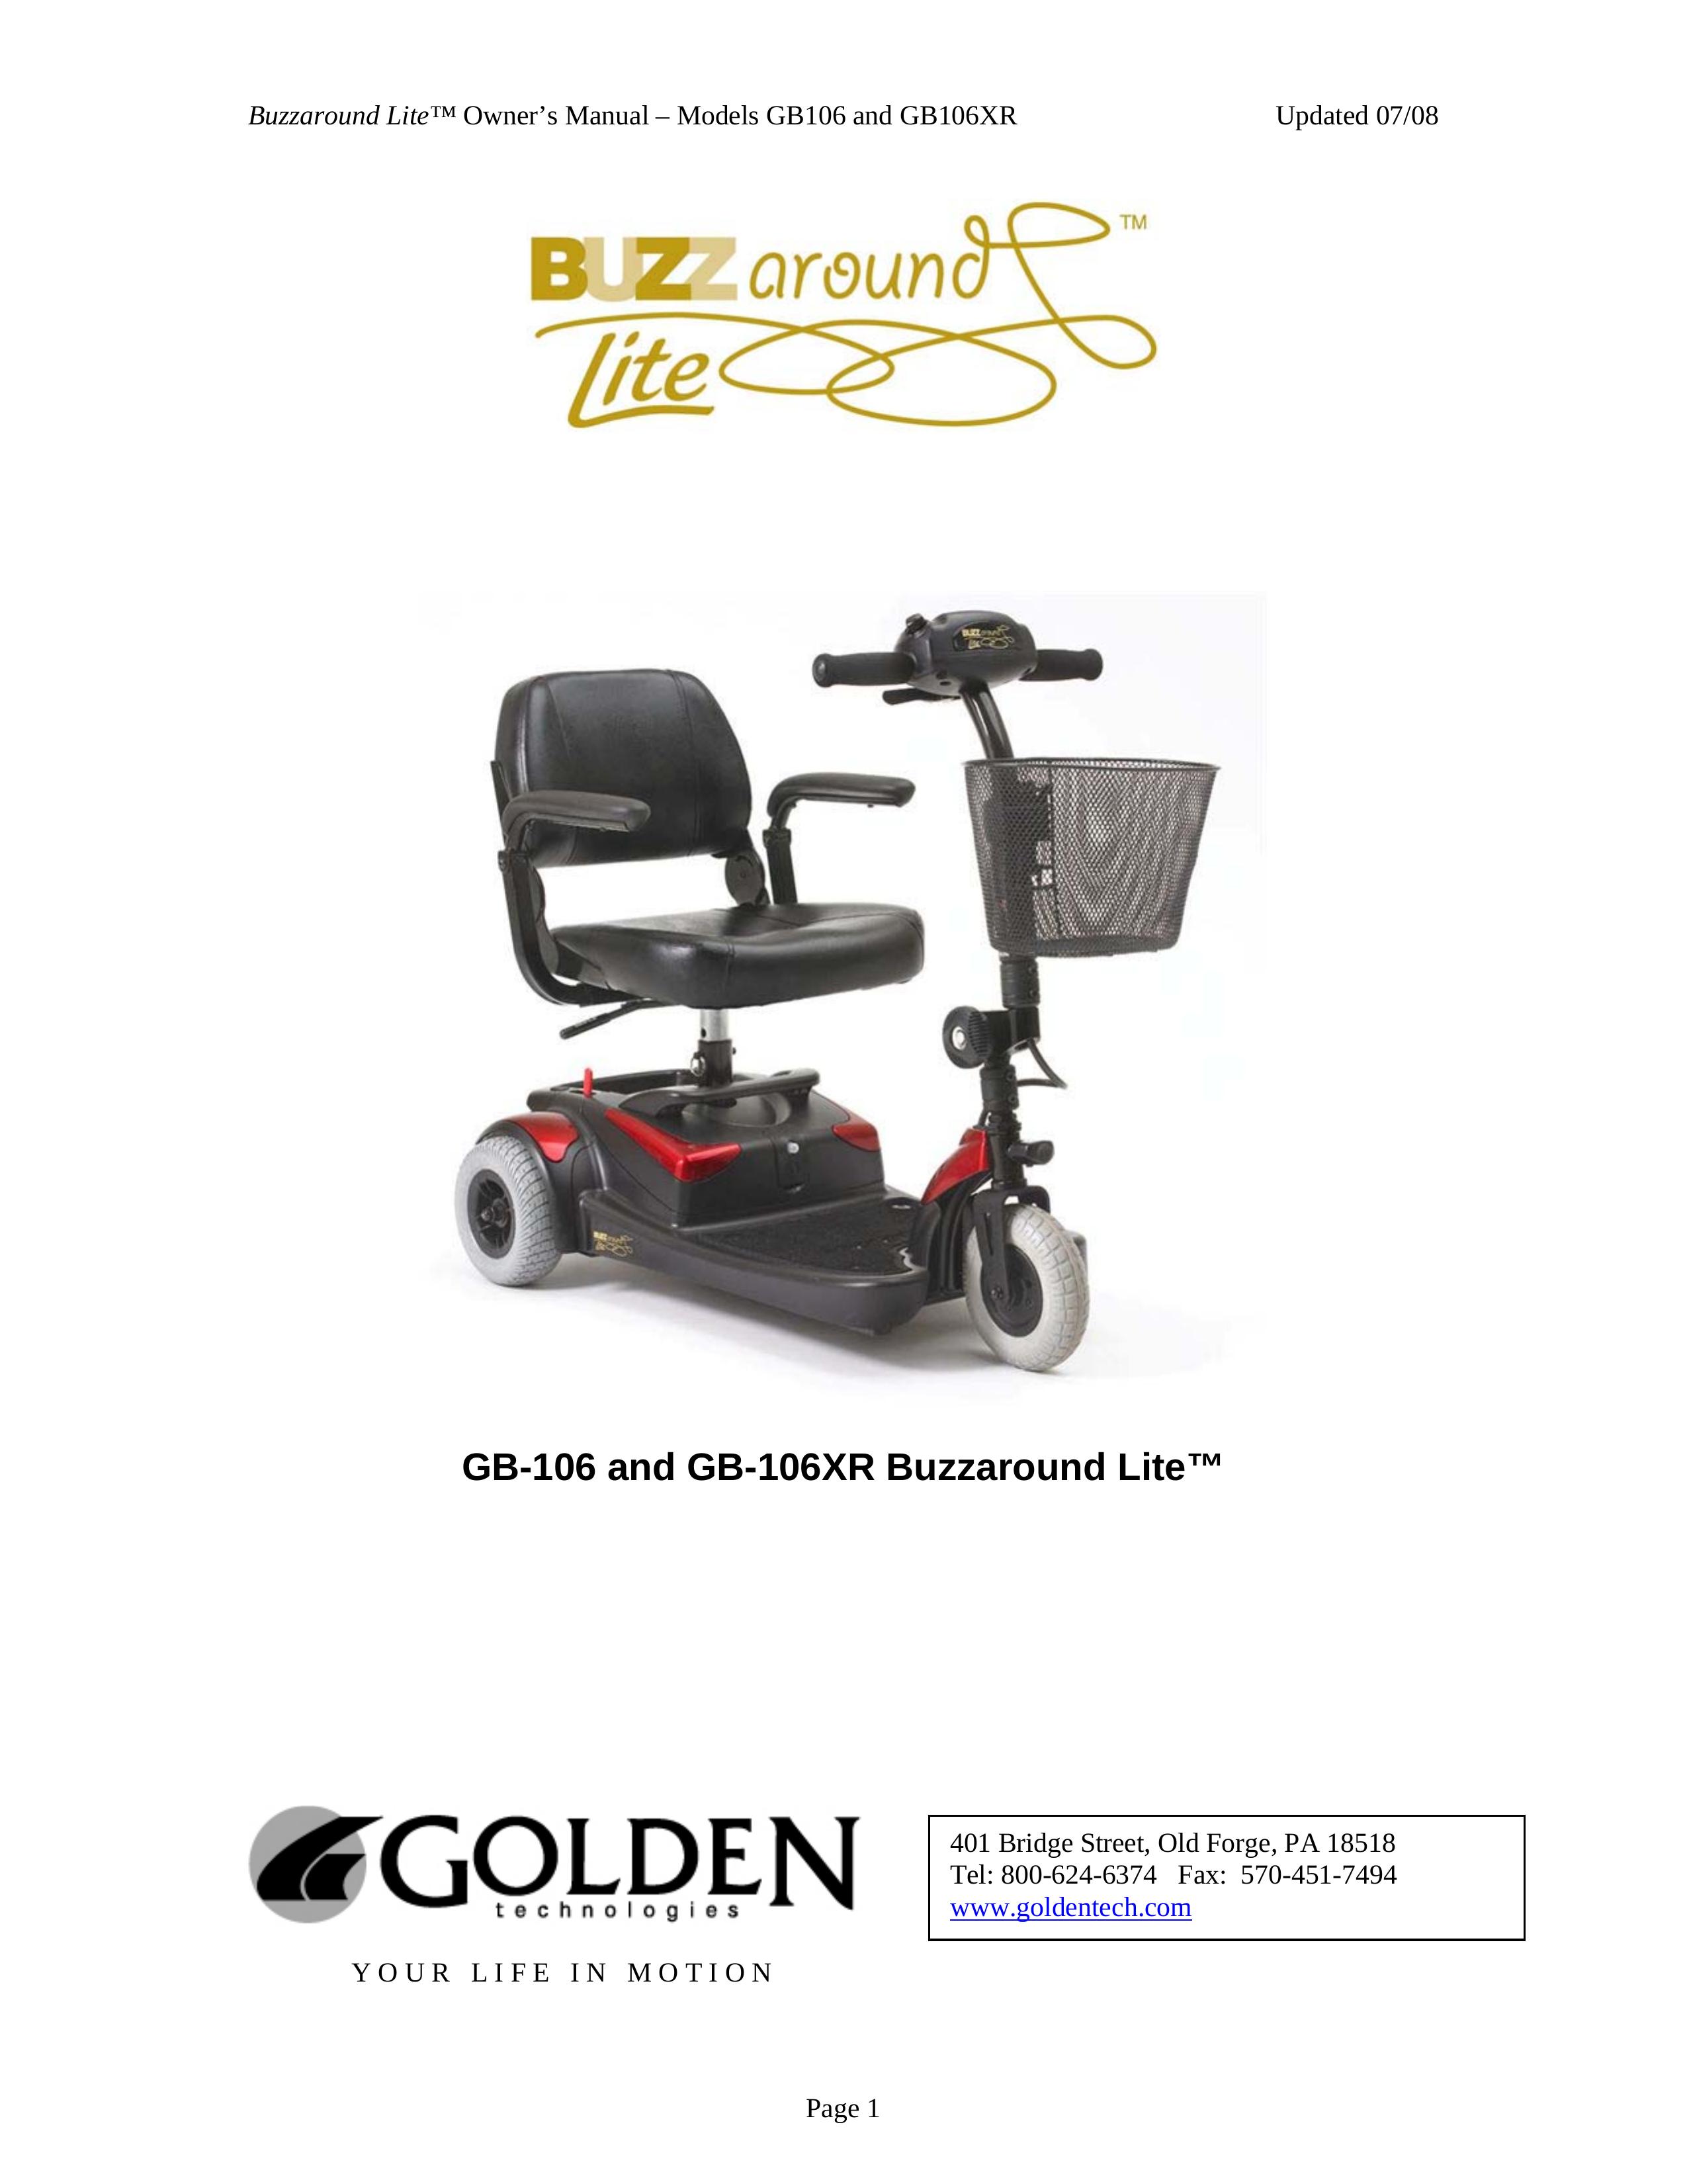 Golden Technologies GB106XR Mobility Scooter User Manual